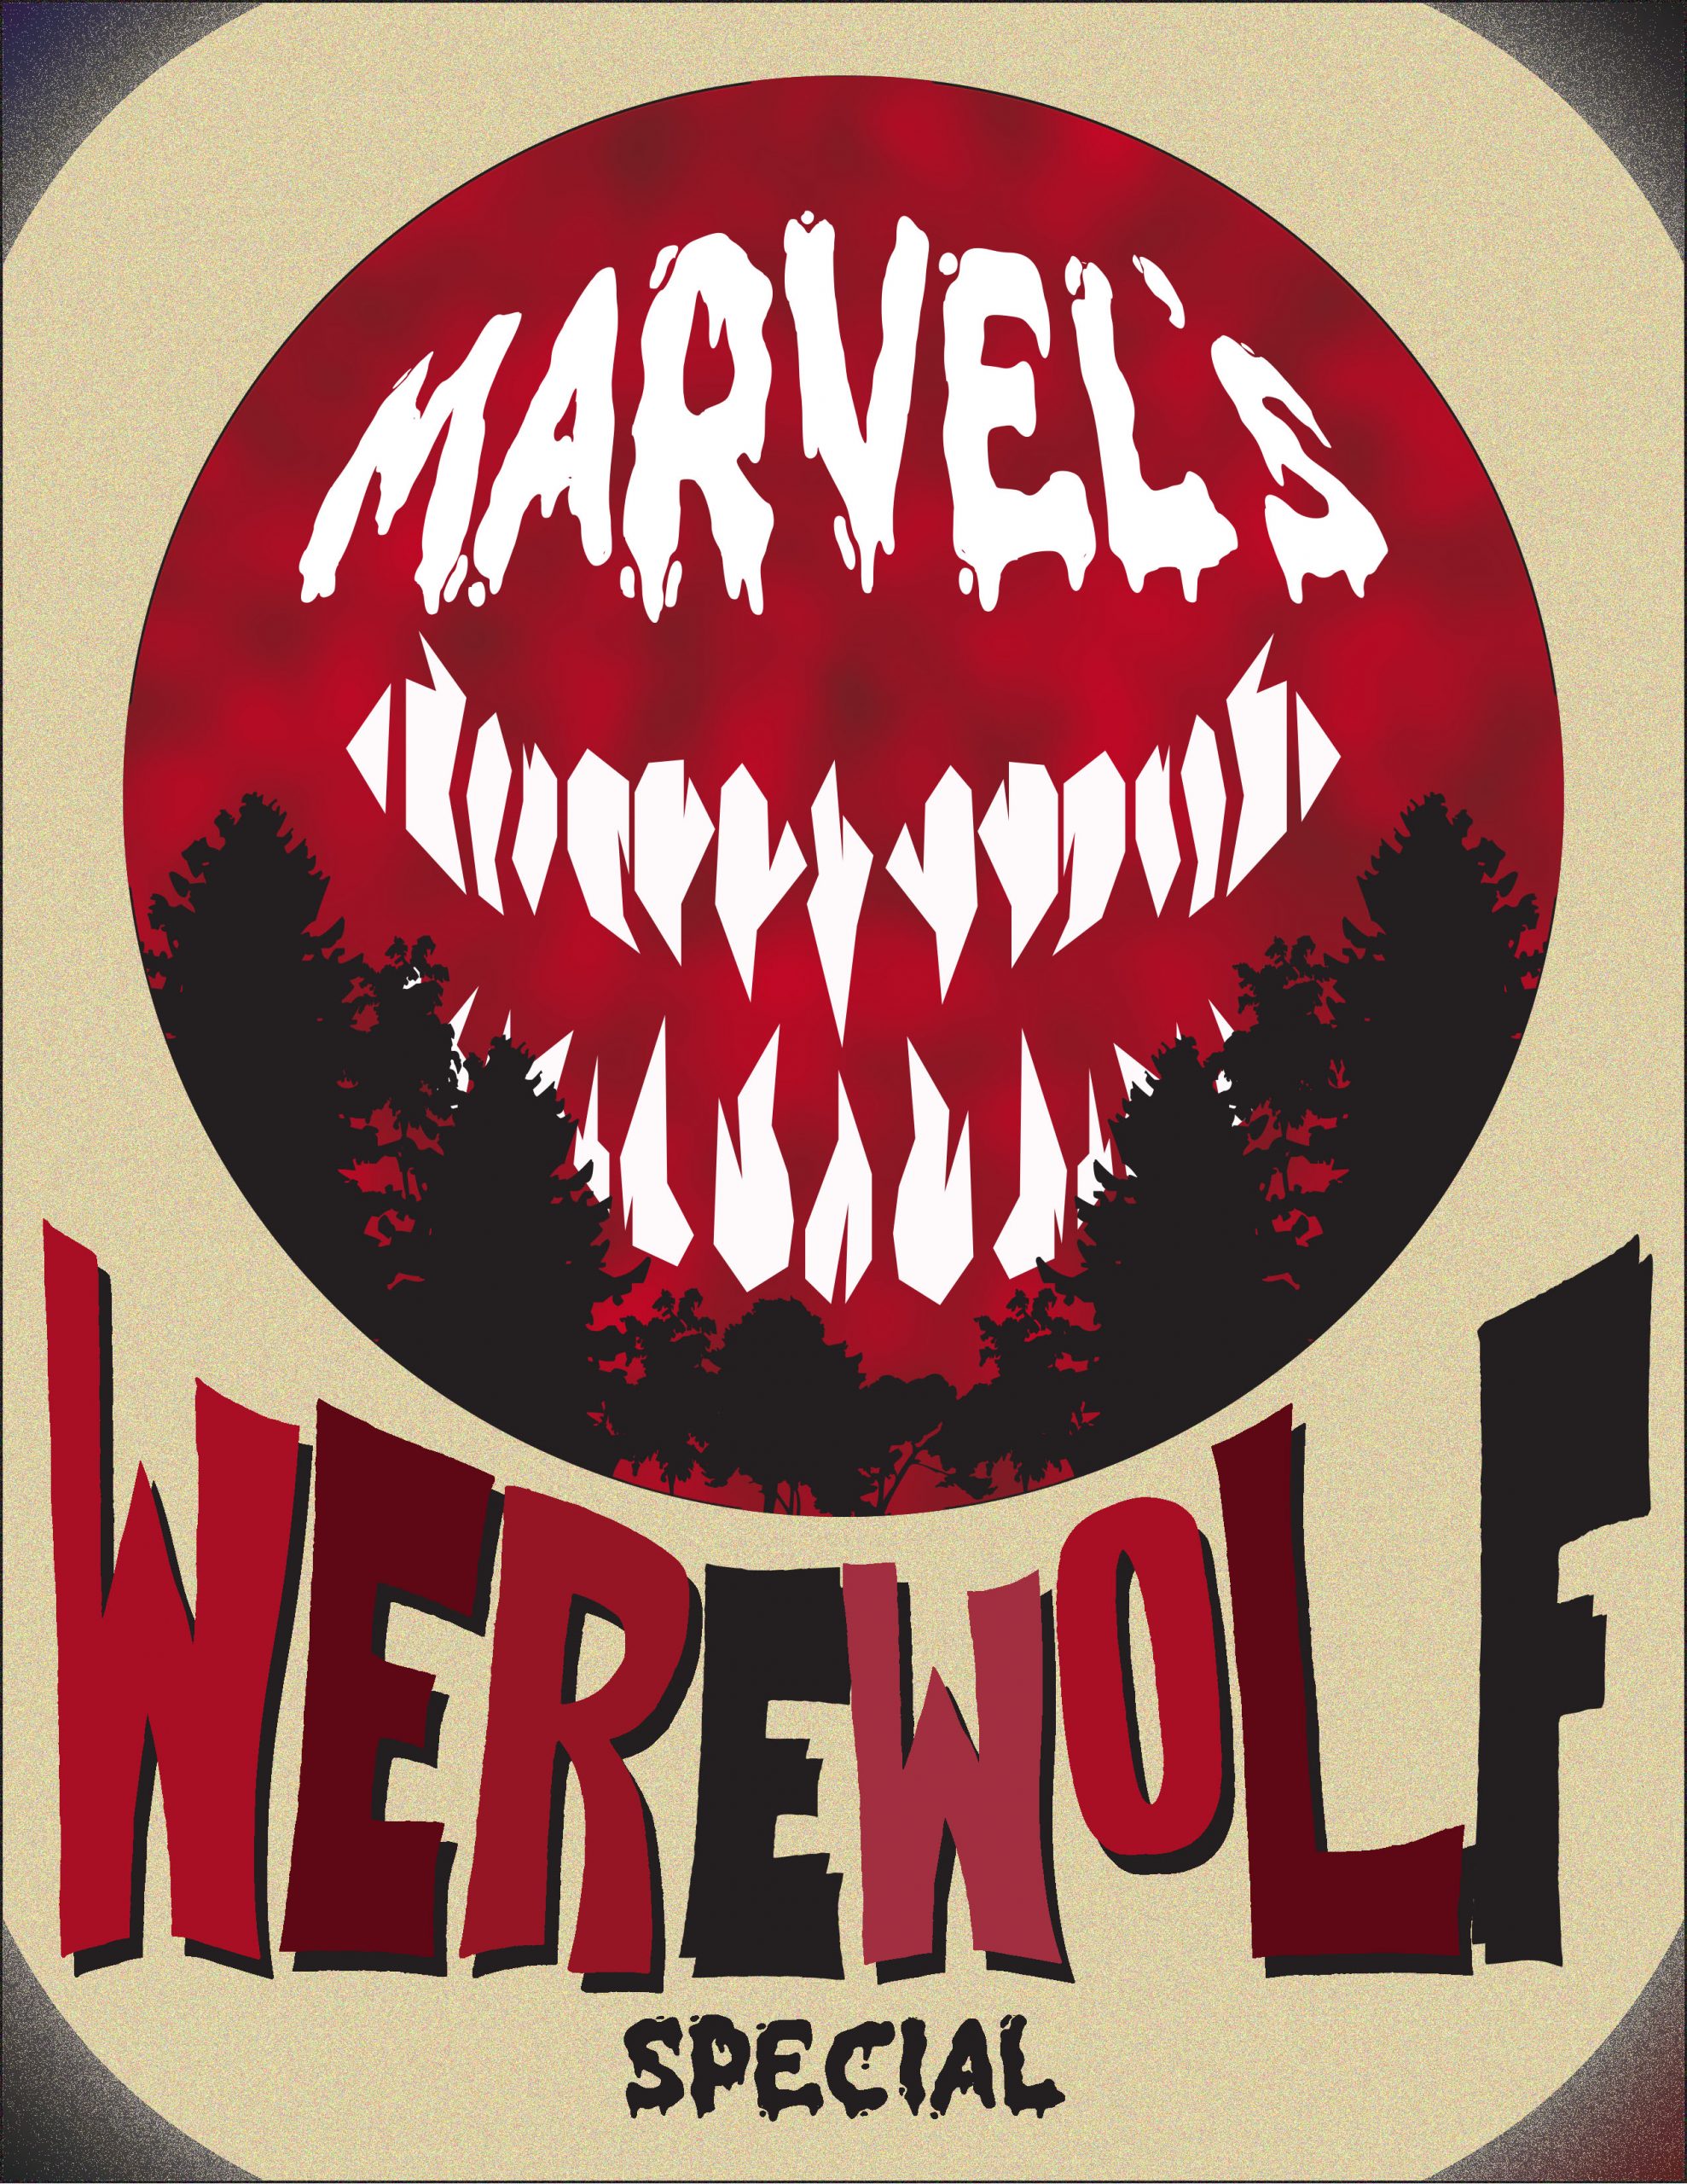 First 'Werewolf By Night' Reactions Praise Marvel's Halloween Special